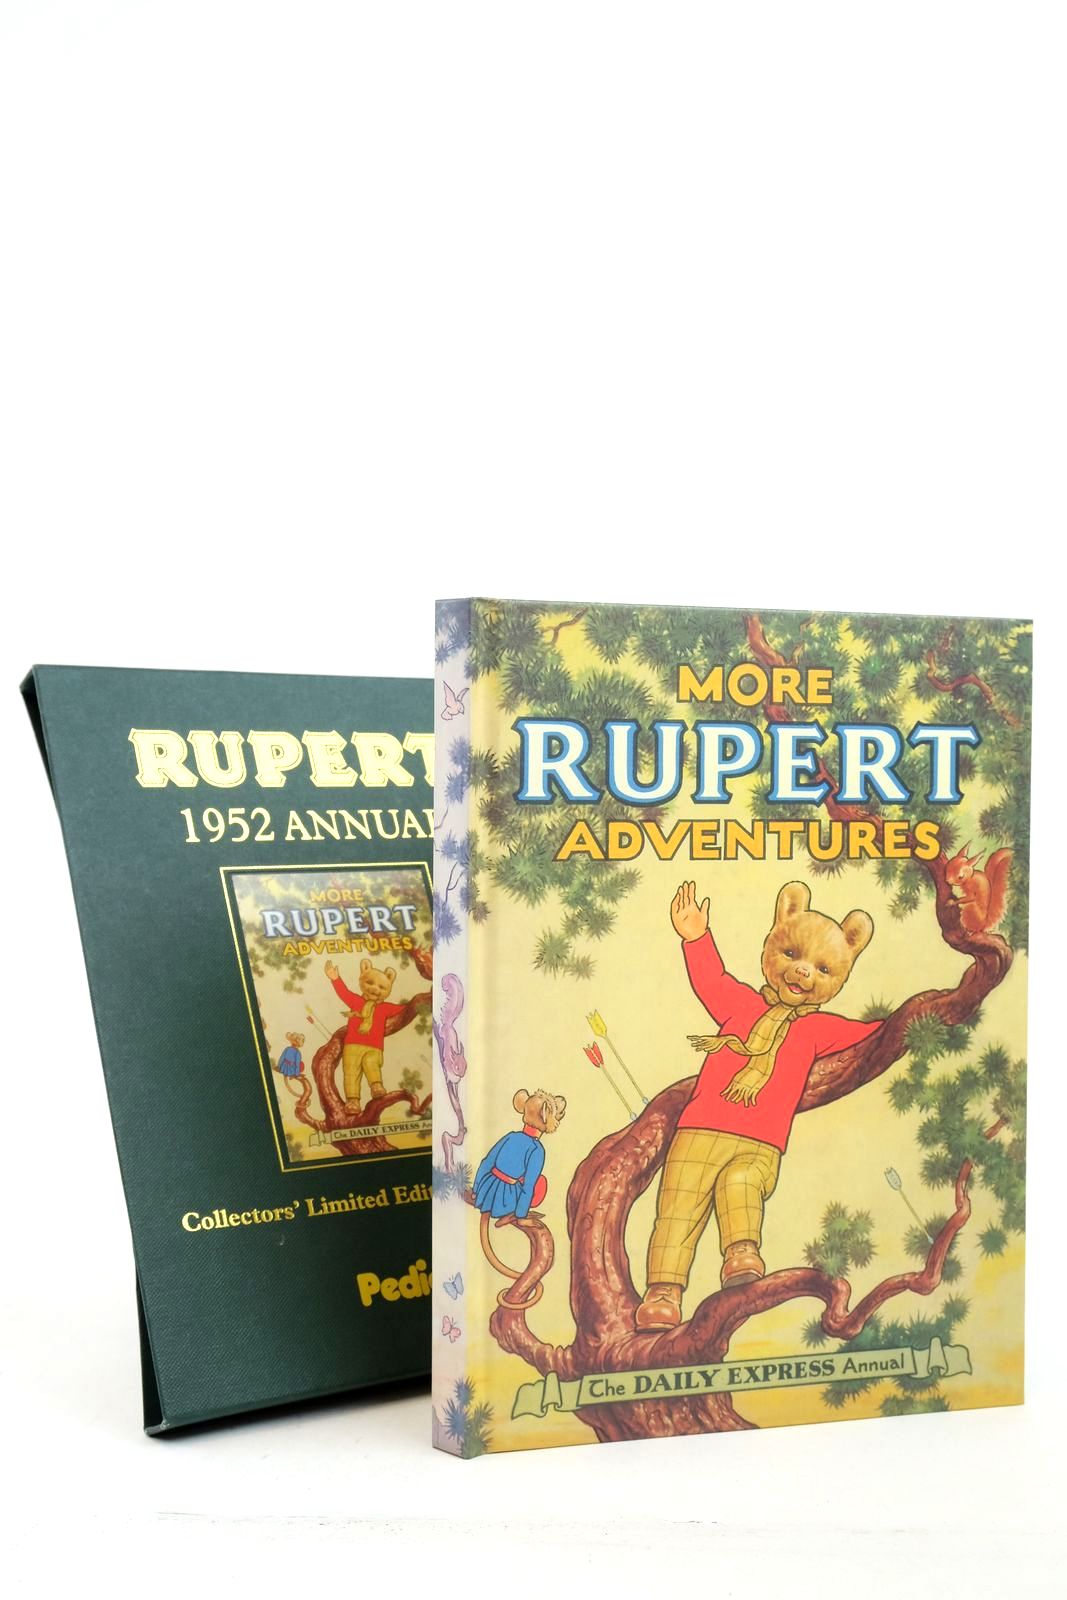 Photo of RUPERT ANNUAL 1952 (FACSIMILE) - MORE RUPERT ADVENTURES written by Bestall, Alfred illustrated by Bestall, Alfred published by Pedigree Books Limited (STOCK CODE: 2140277)  for sale by Stella & Rose's Books